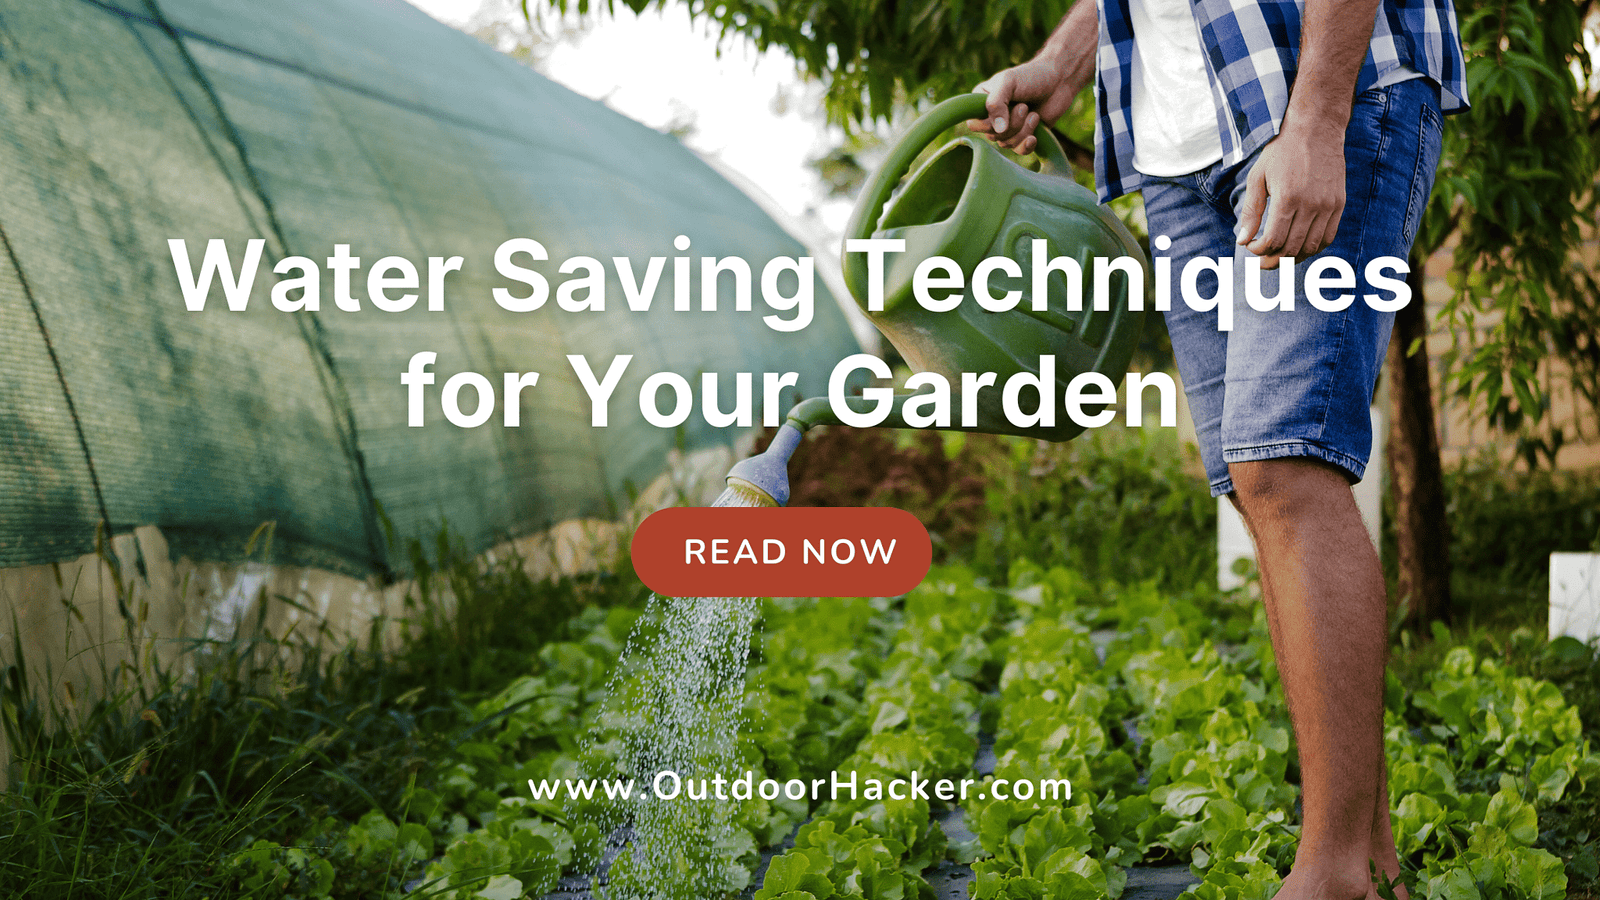 Efficient Water Saving Techniques for Your Garden